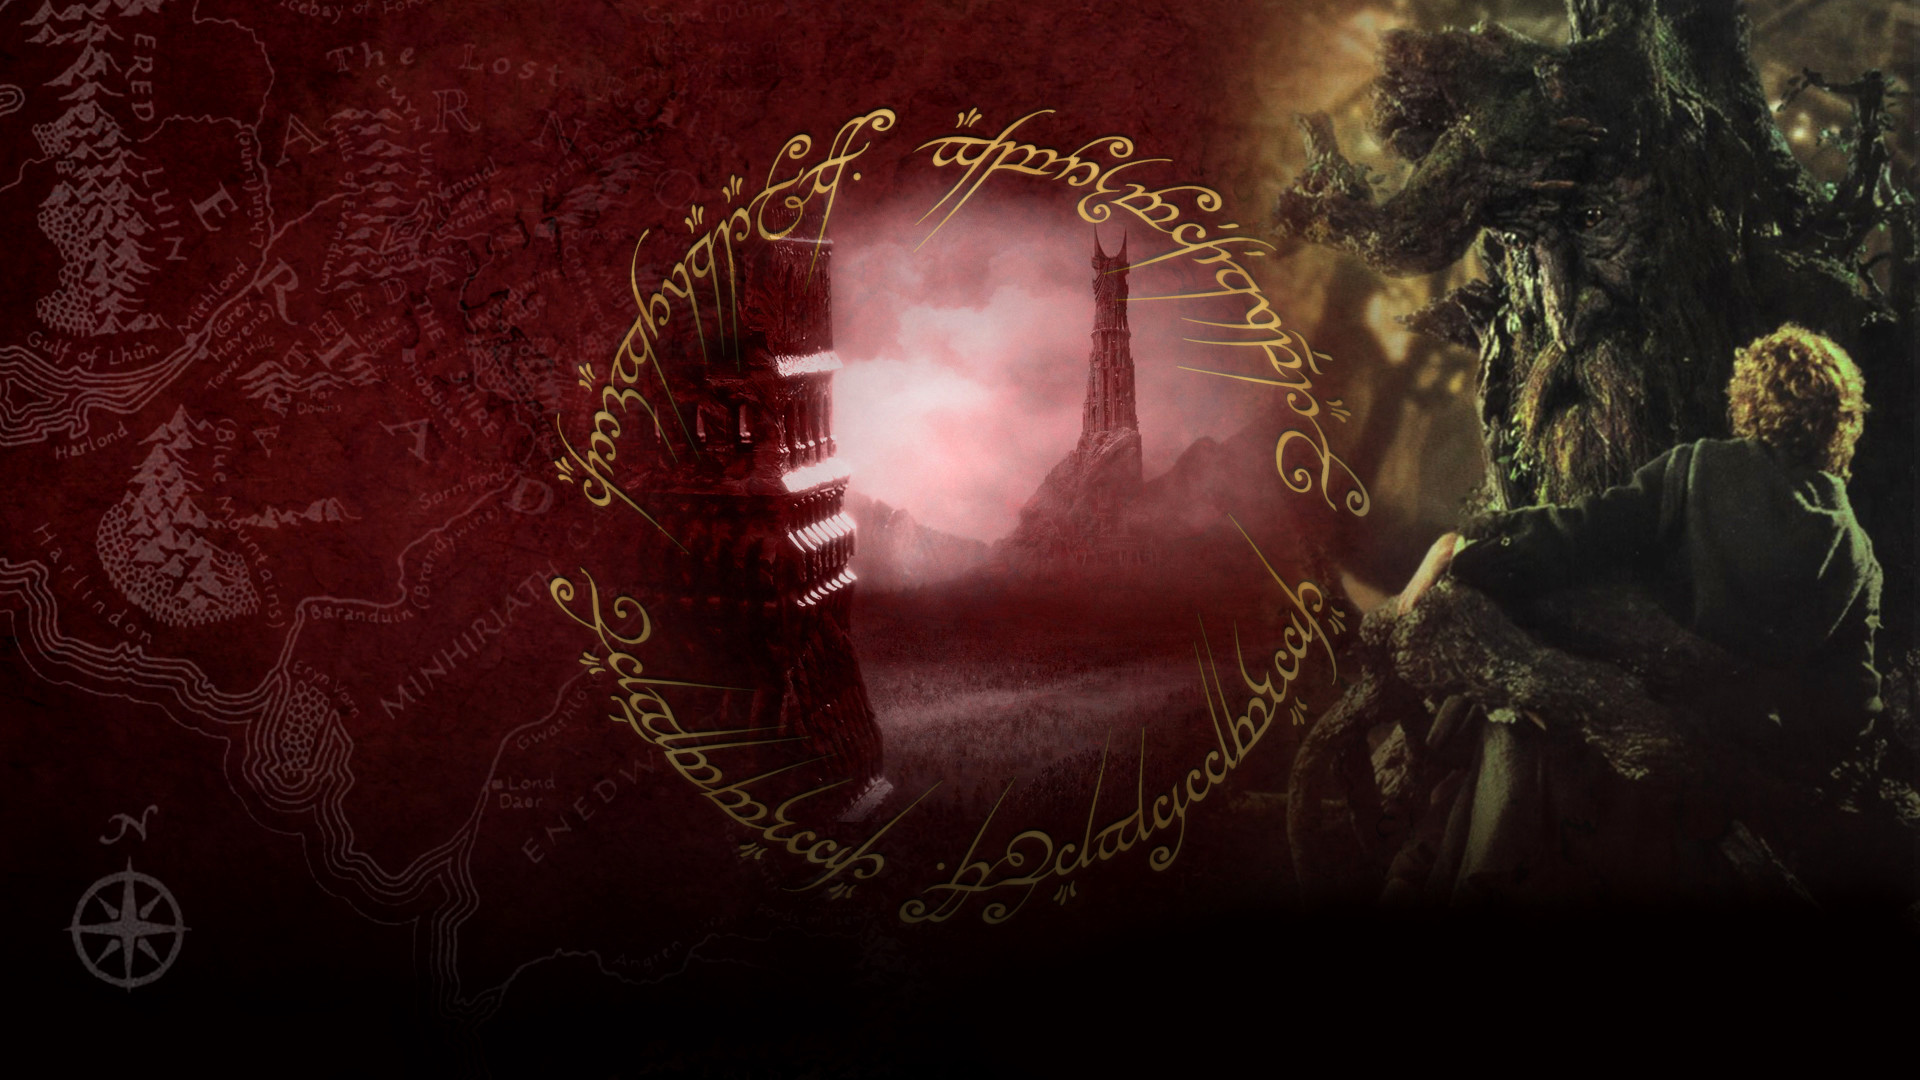 Movie The Lord of the Rings: The Two Towers HD Wallpaper | Background Image